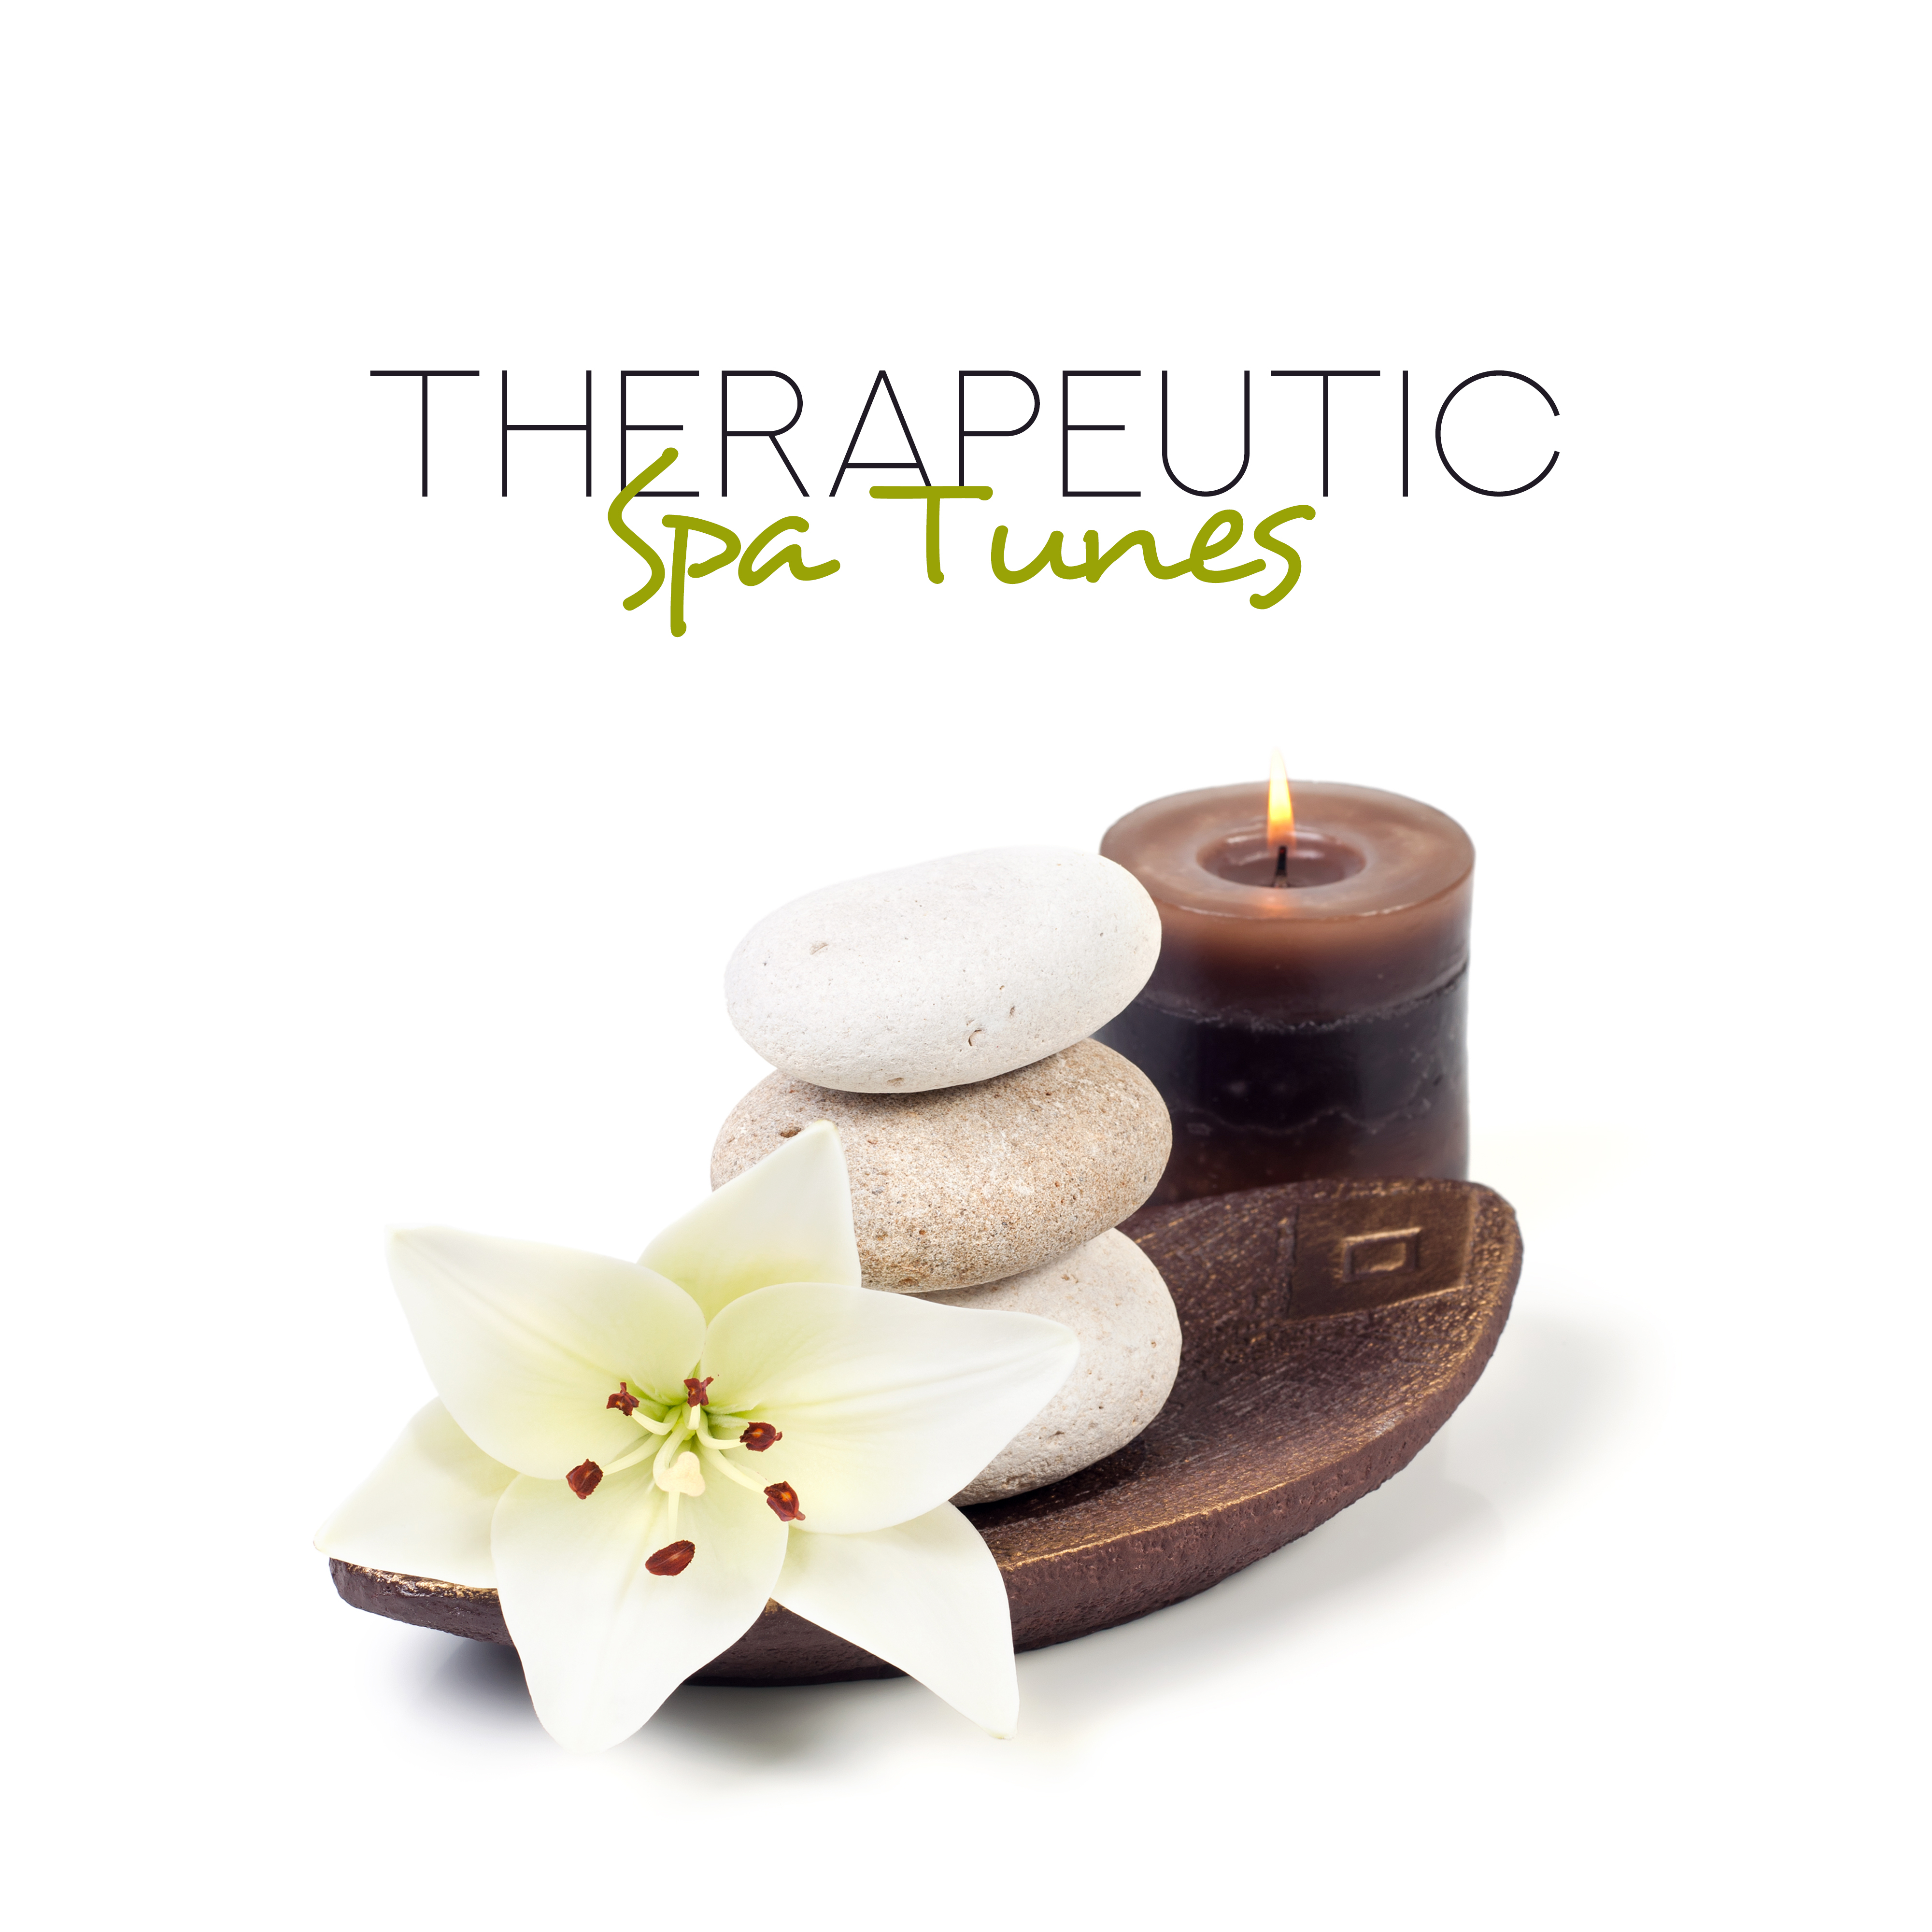 Therapeutic Spa Tunes - Music for Relax and Unwind, for Stress-Related Problems, Tension, Nervousness and Depression, for Massage, Treatments in Spa, Rehabilitation and Therapy